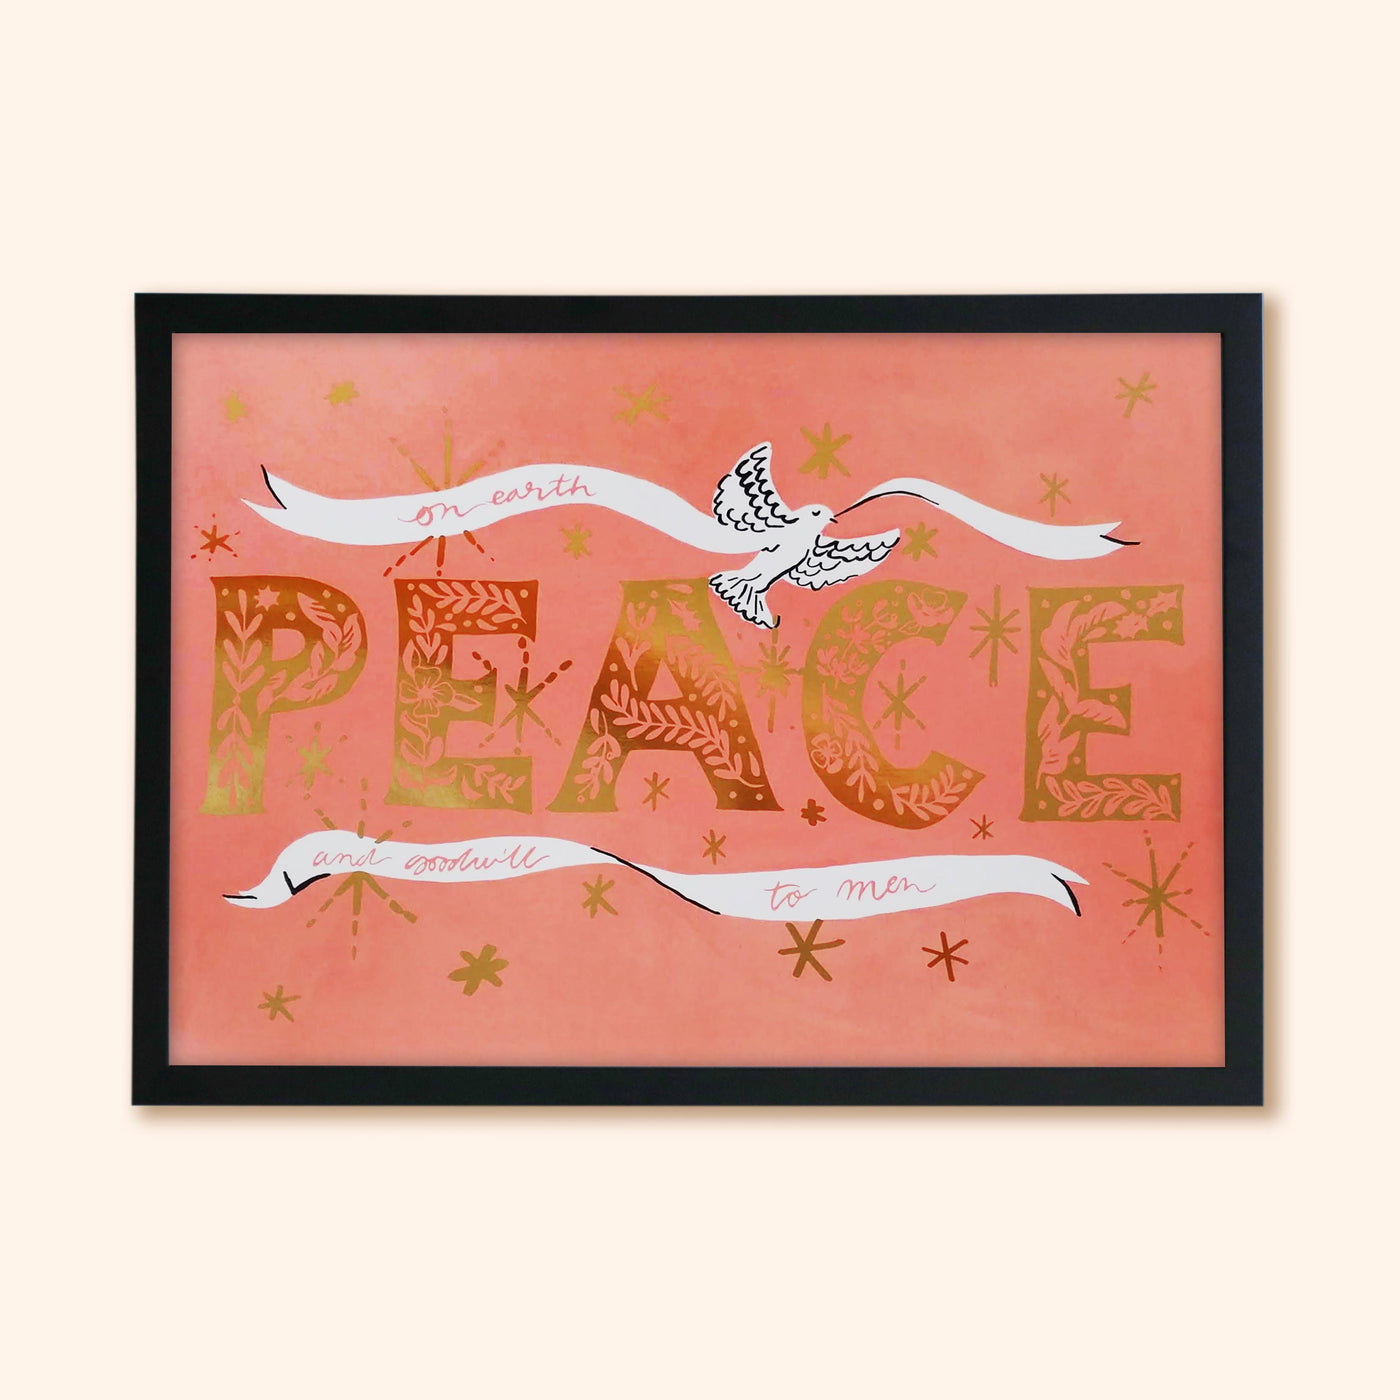 "PEACE" in gold lettering on a pink background, inside a black wood frame